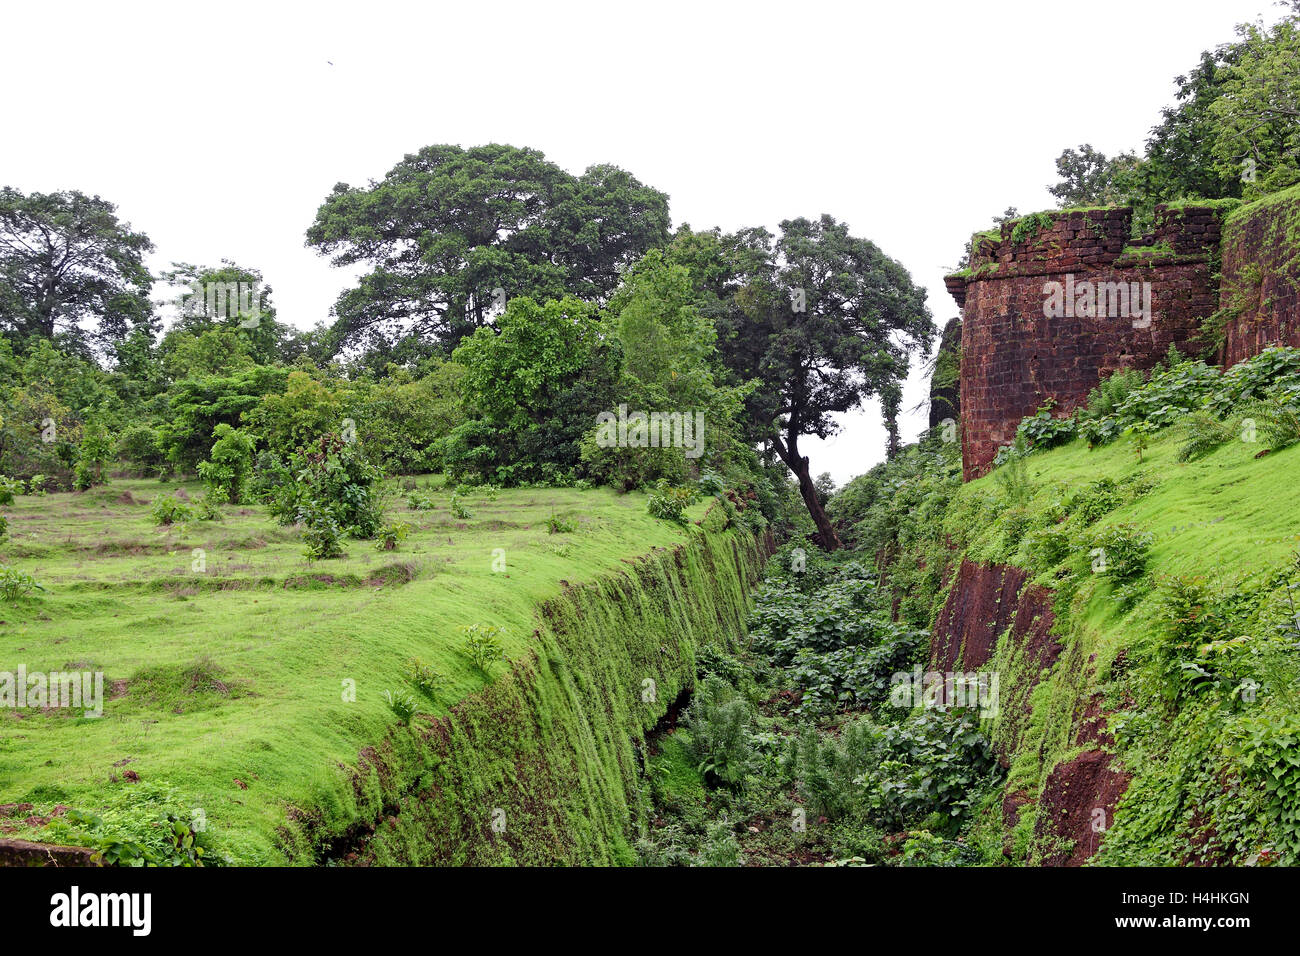 Remains of the deep trench made around for security in Cabo de Rama Fort in Goa, India. Stock Photo